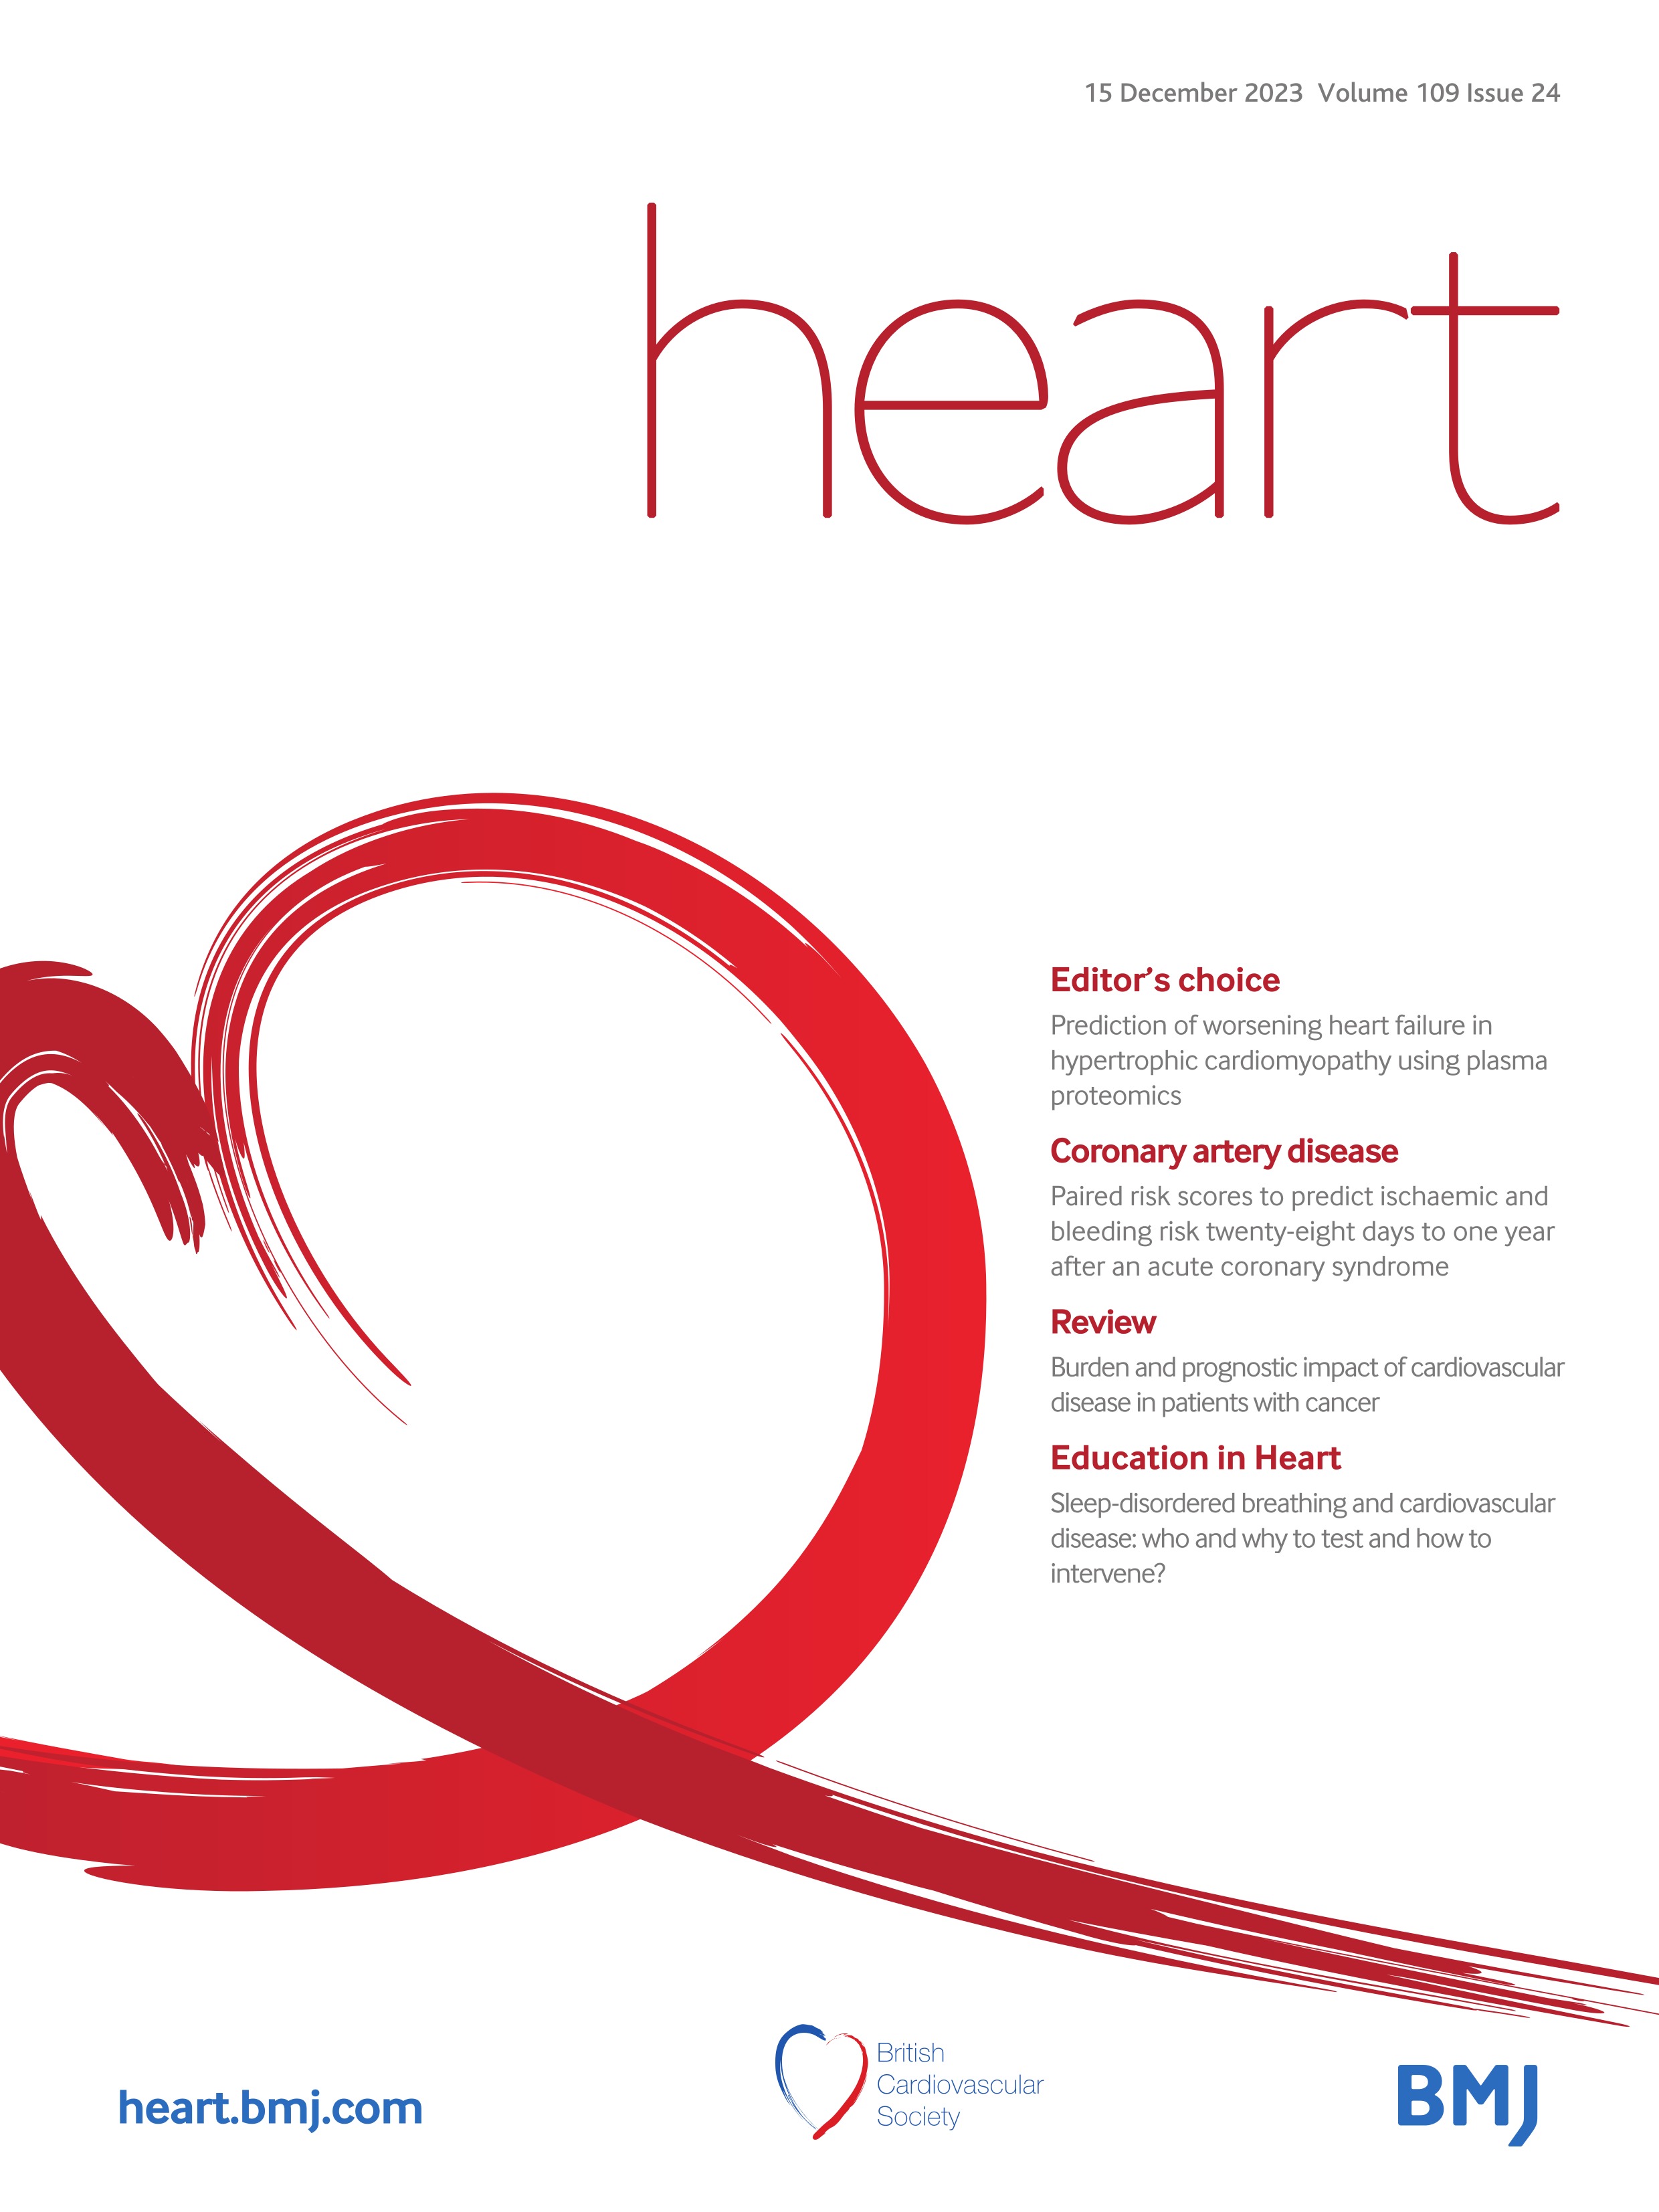 Heartbeat: Proteomics for predicting risk and identifying mechanisms of disease progression